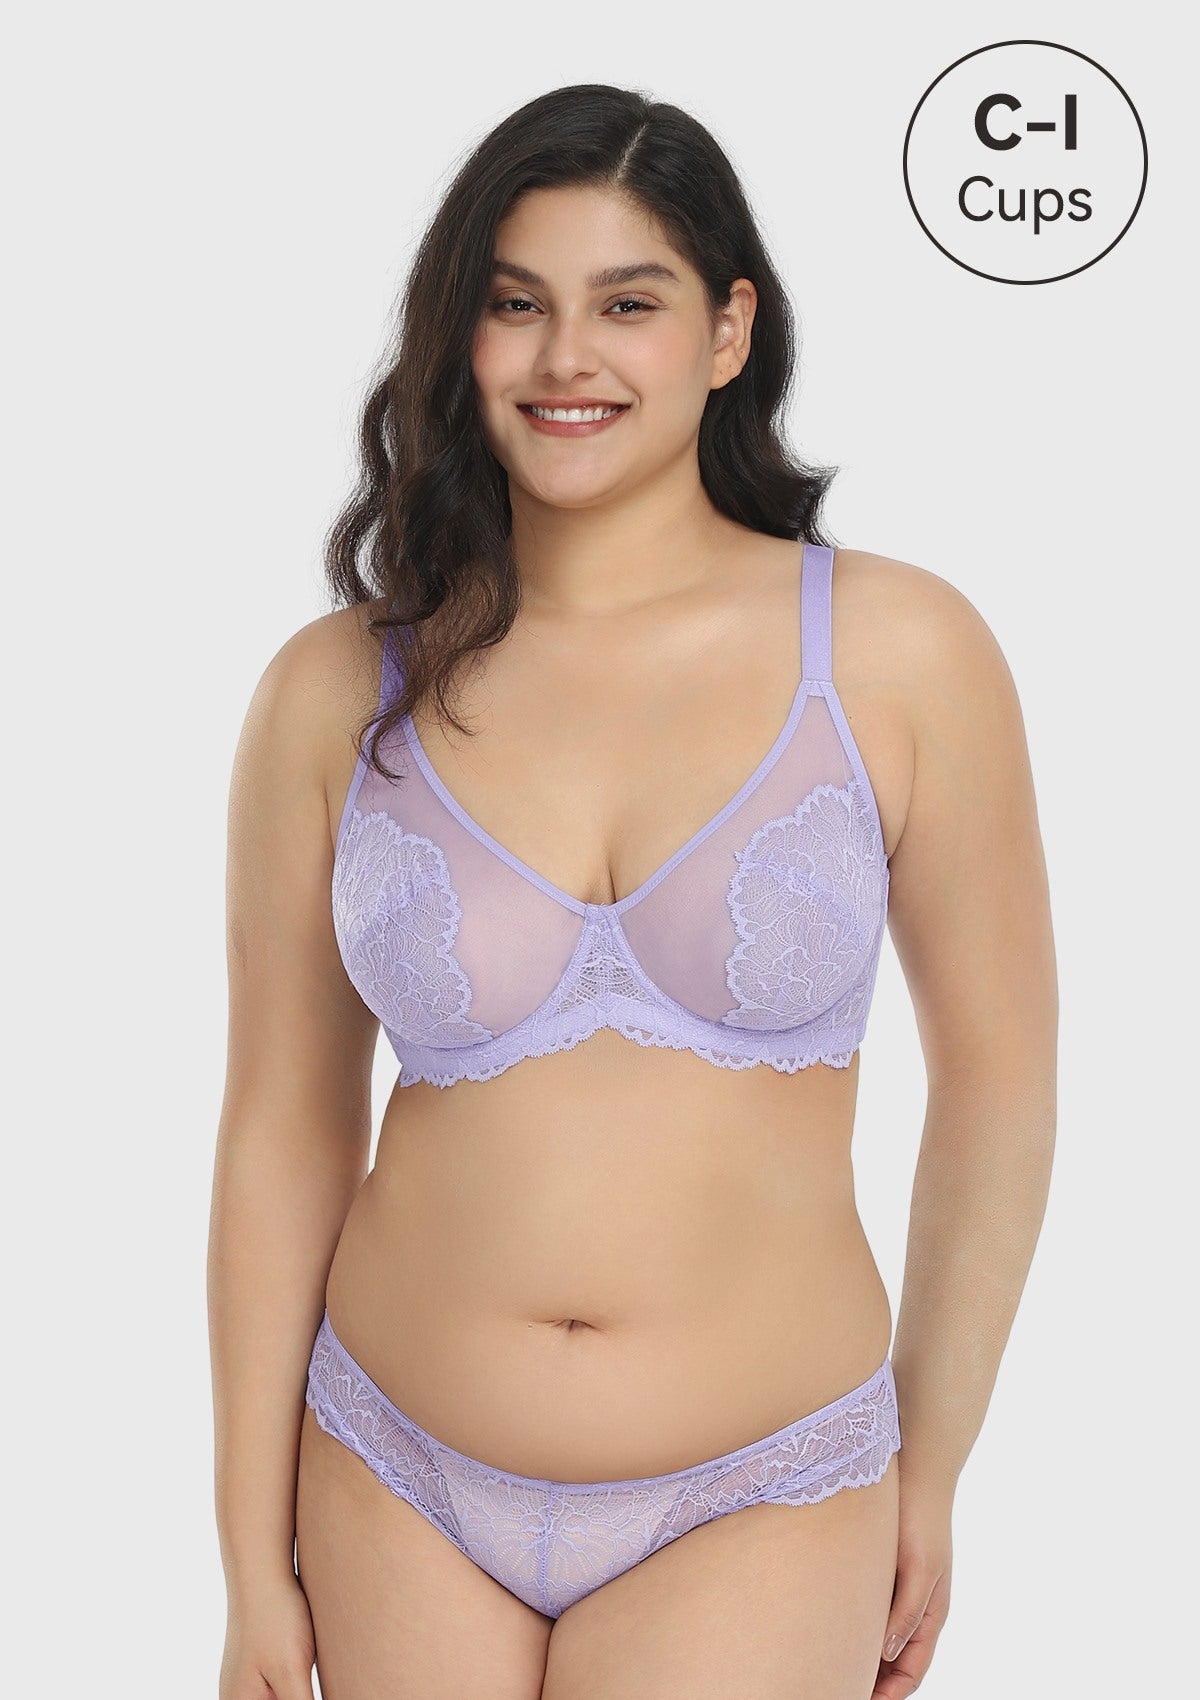 HSIA Blossom Transparent Lace Bra: Plus Size Wired Back Smoothing Bra - Light Purple / 34 / DD/E